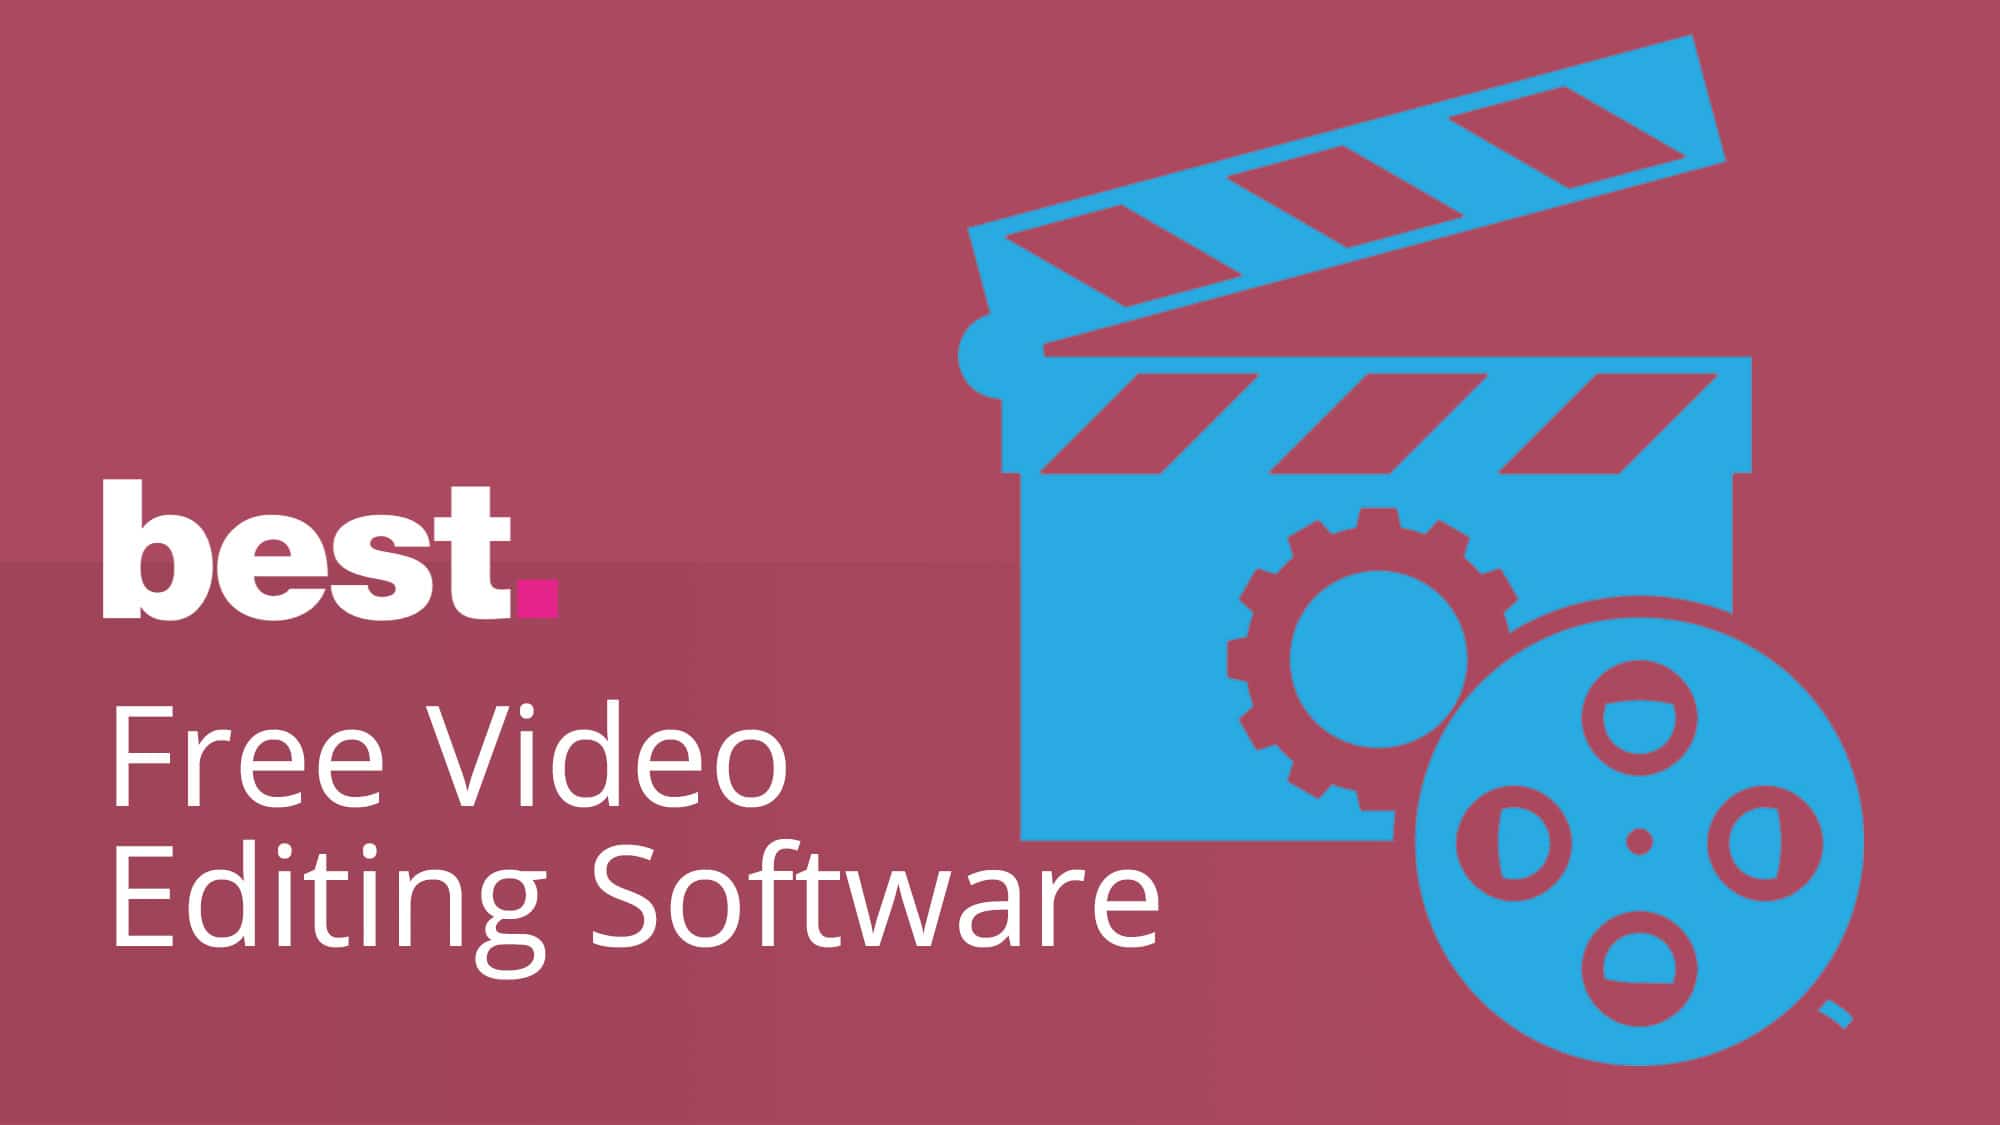 best youtube video editor free windows 7 download